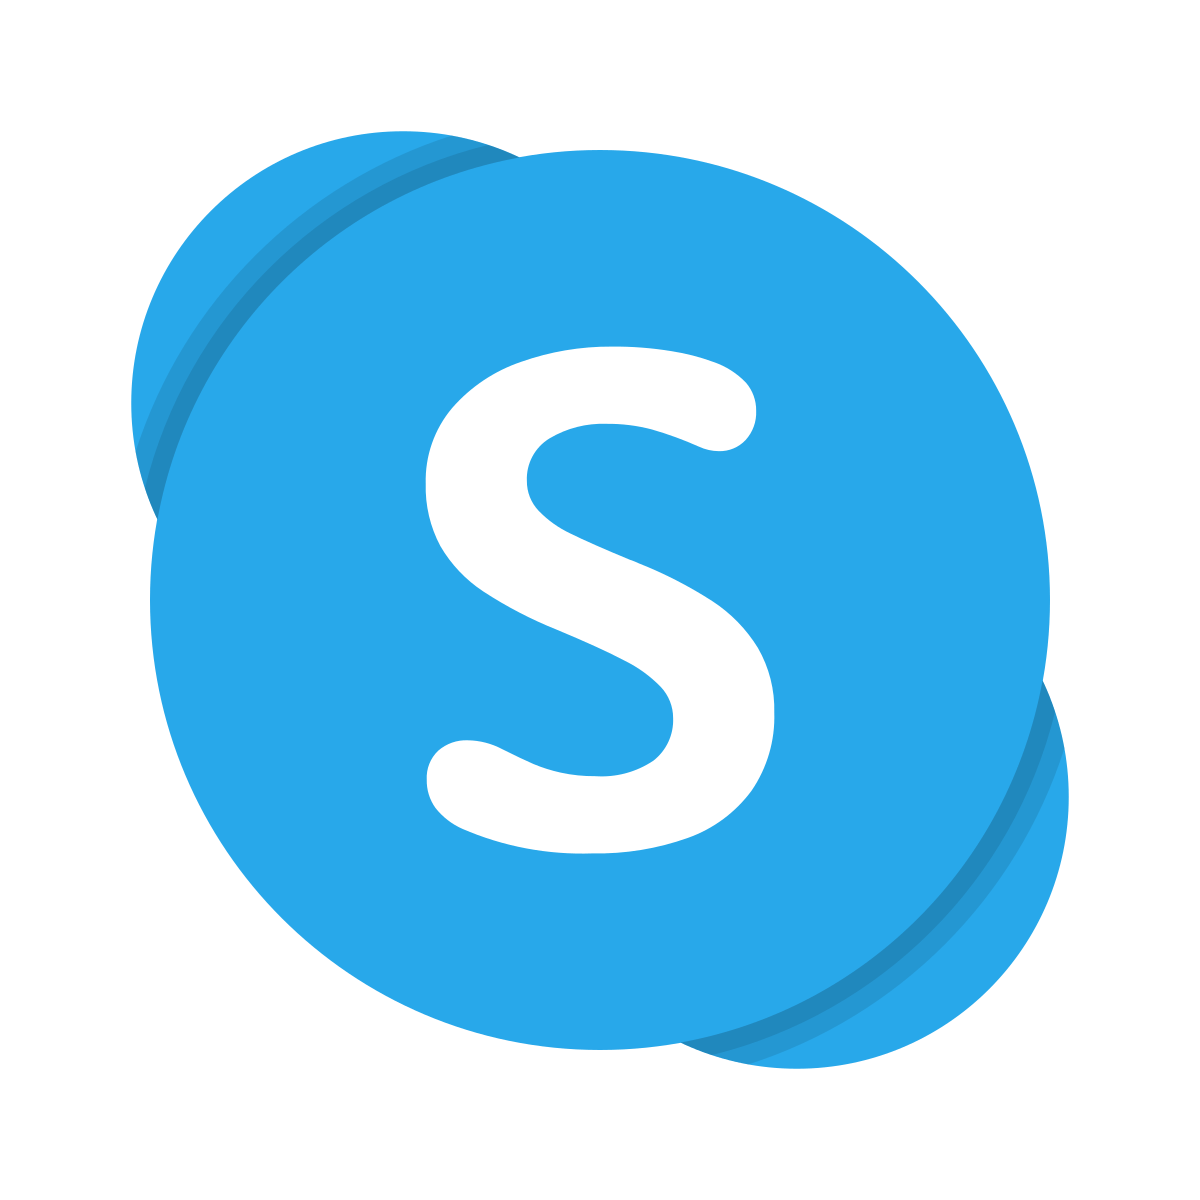 How to make someone a presenter in a Skype conference